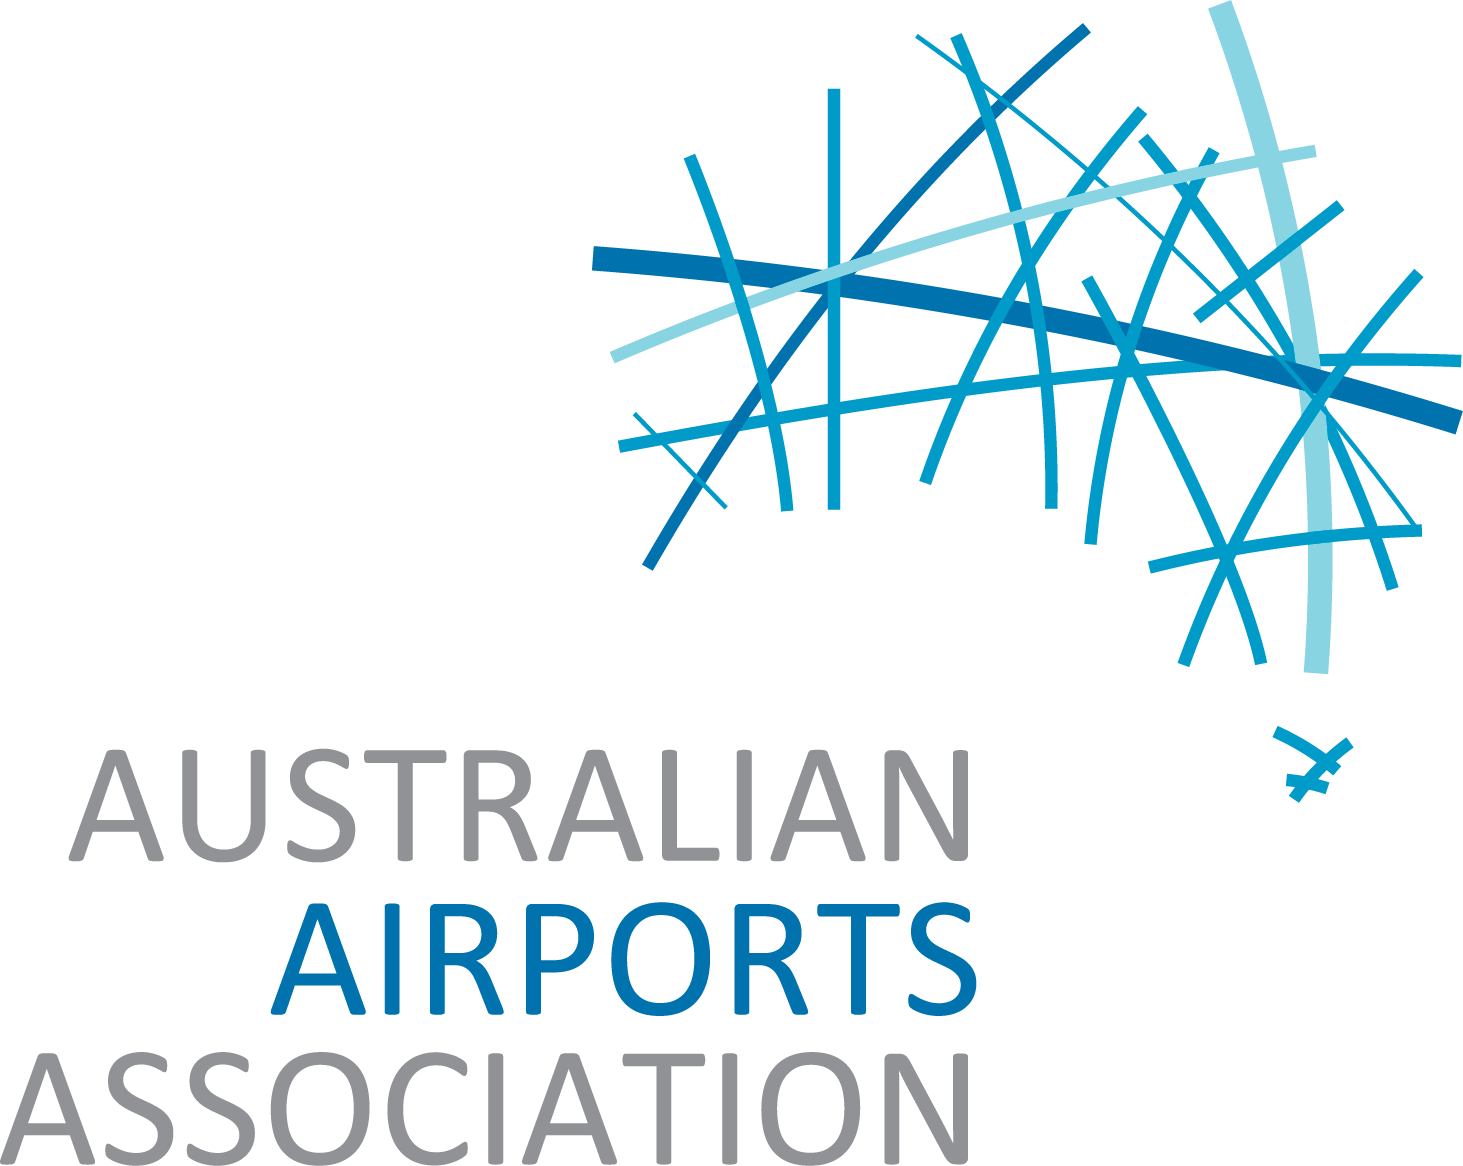 Australian Airports Association National Conference